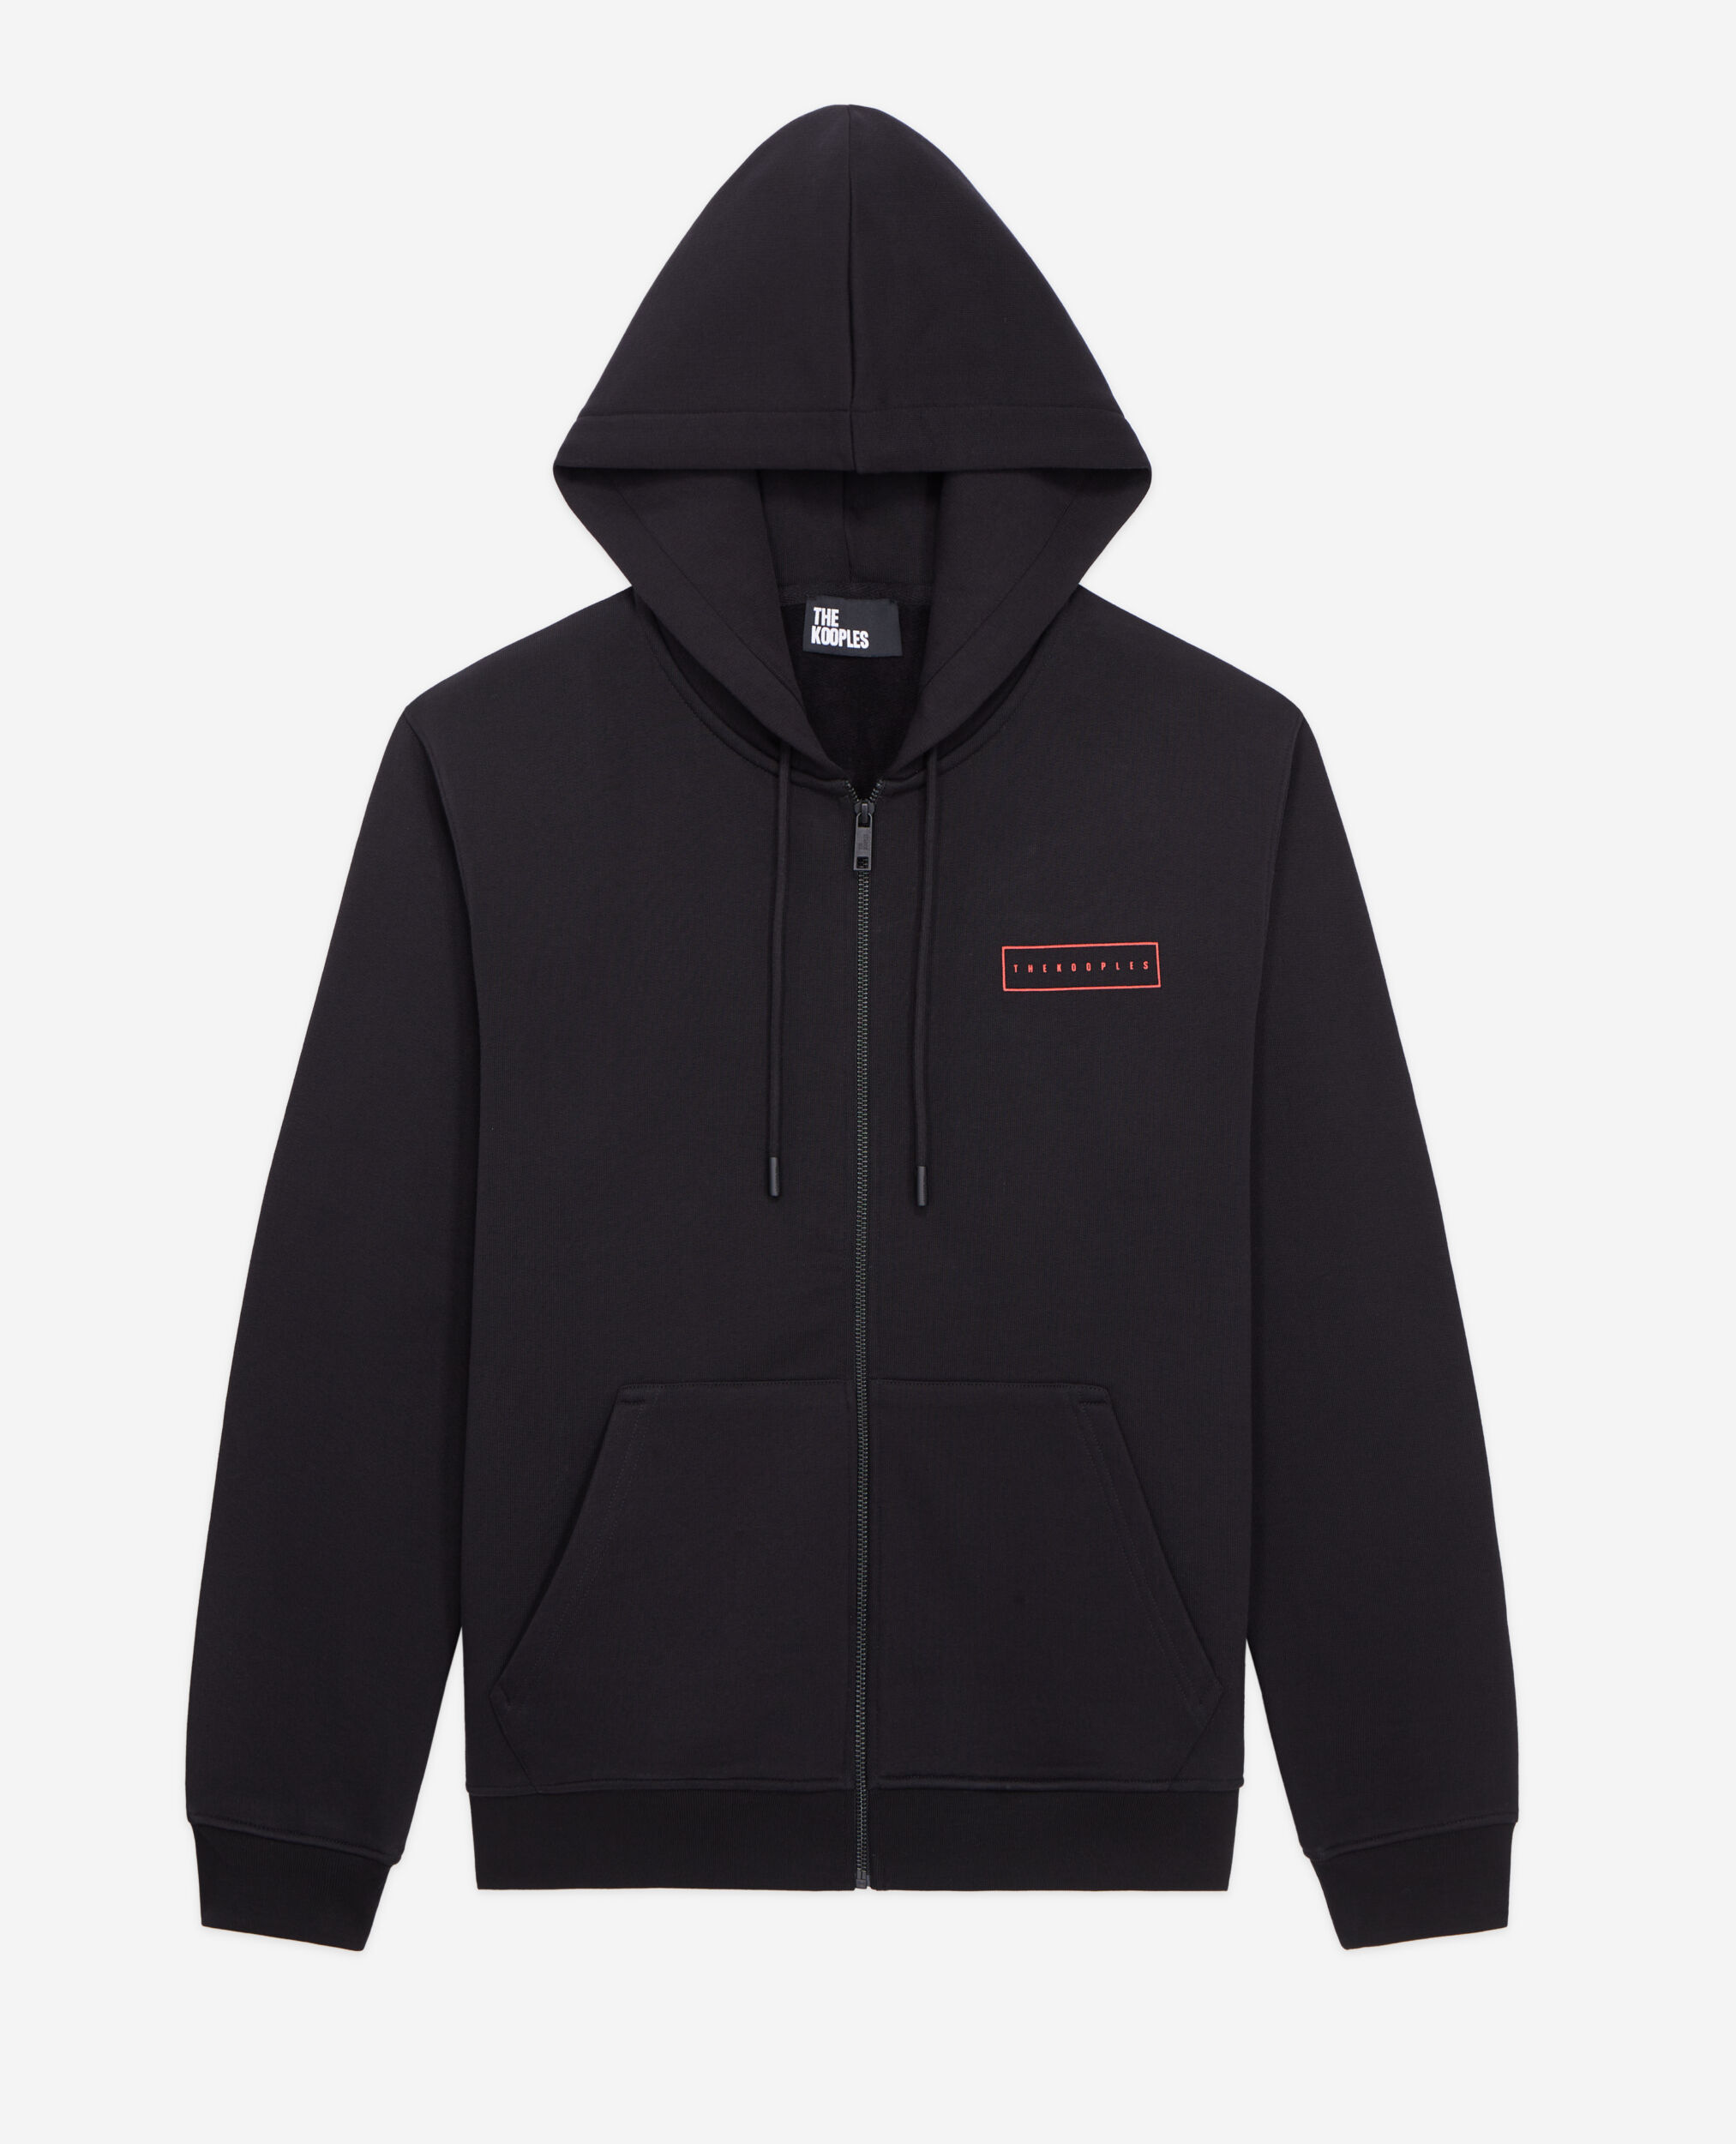 Black hoodie with X Rated serigraphy | The Kooples - UK